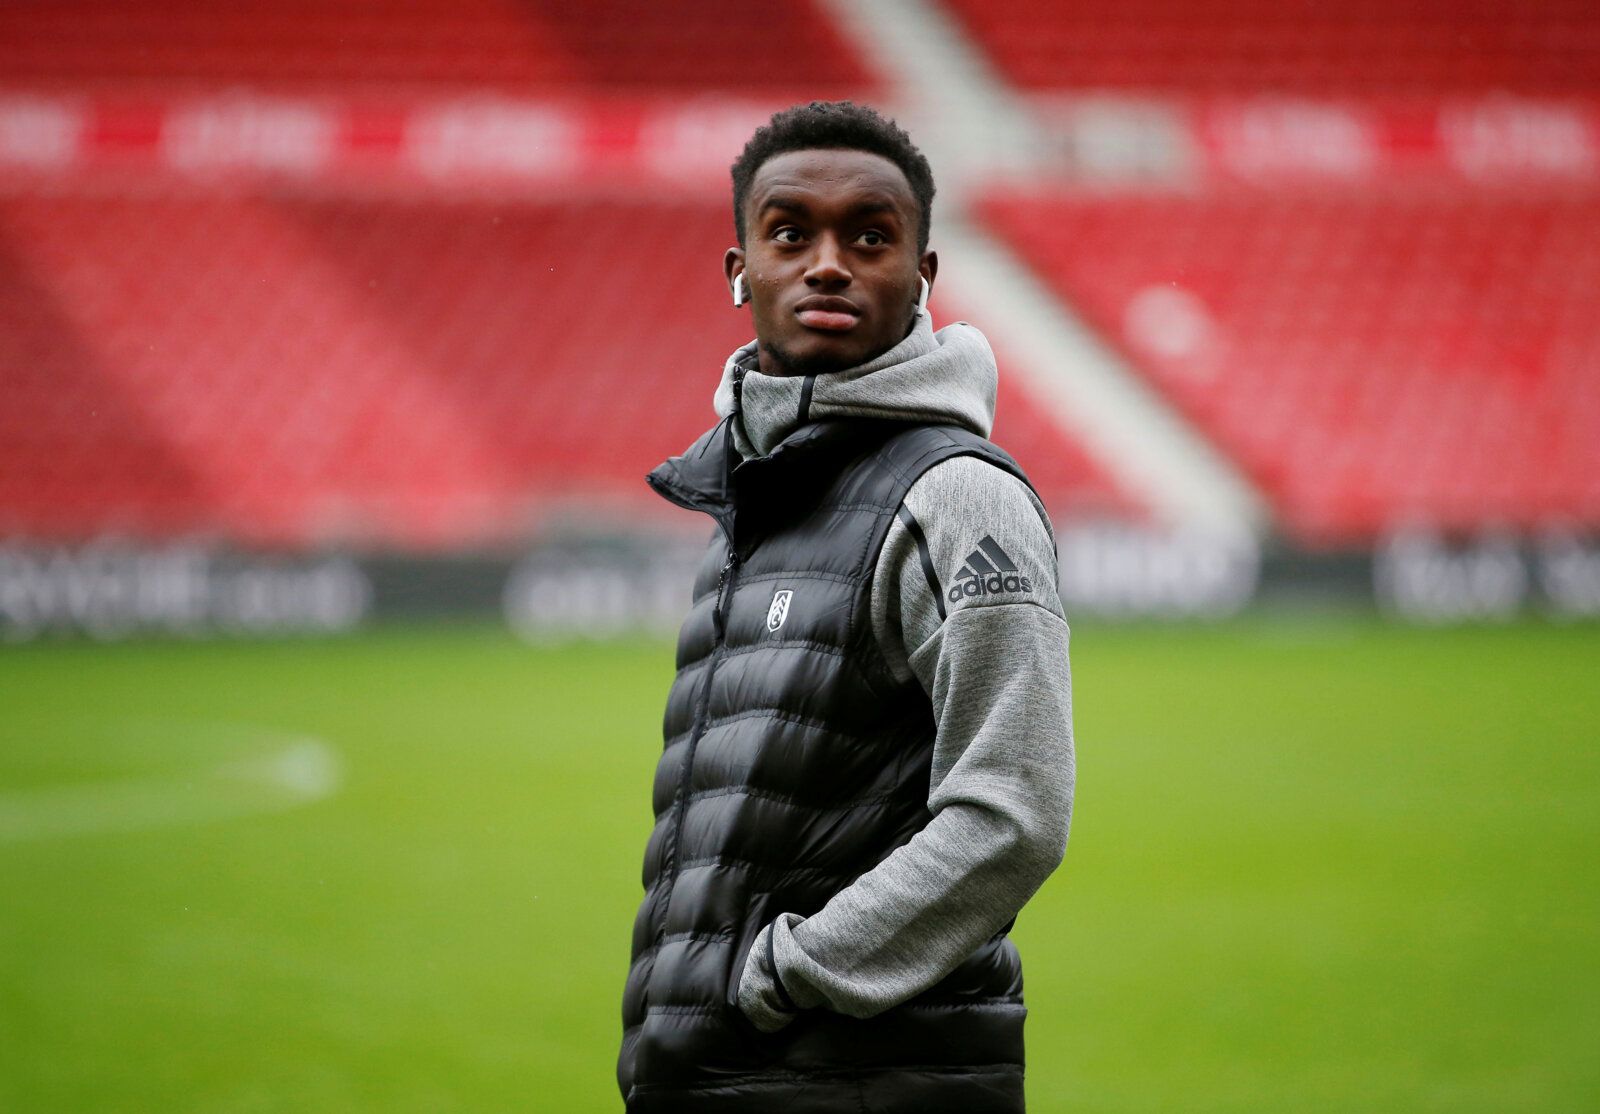 Soccer Football - Championship - Middlesbrough v Fulham - Riverside Stadium, Middlesbrough, Britain - October 26, 2019   Fulham's Steven Sessegnon on the pitch before the match   Action Images/Craig Brough    EDITORIAL USE ONLY. No use with unauthorized audio, video, data, fixture lists, club/league logos or 